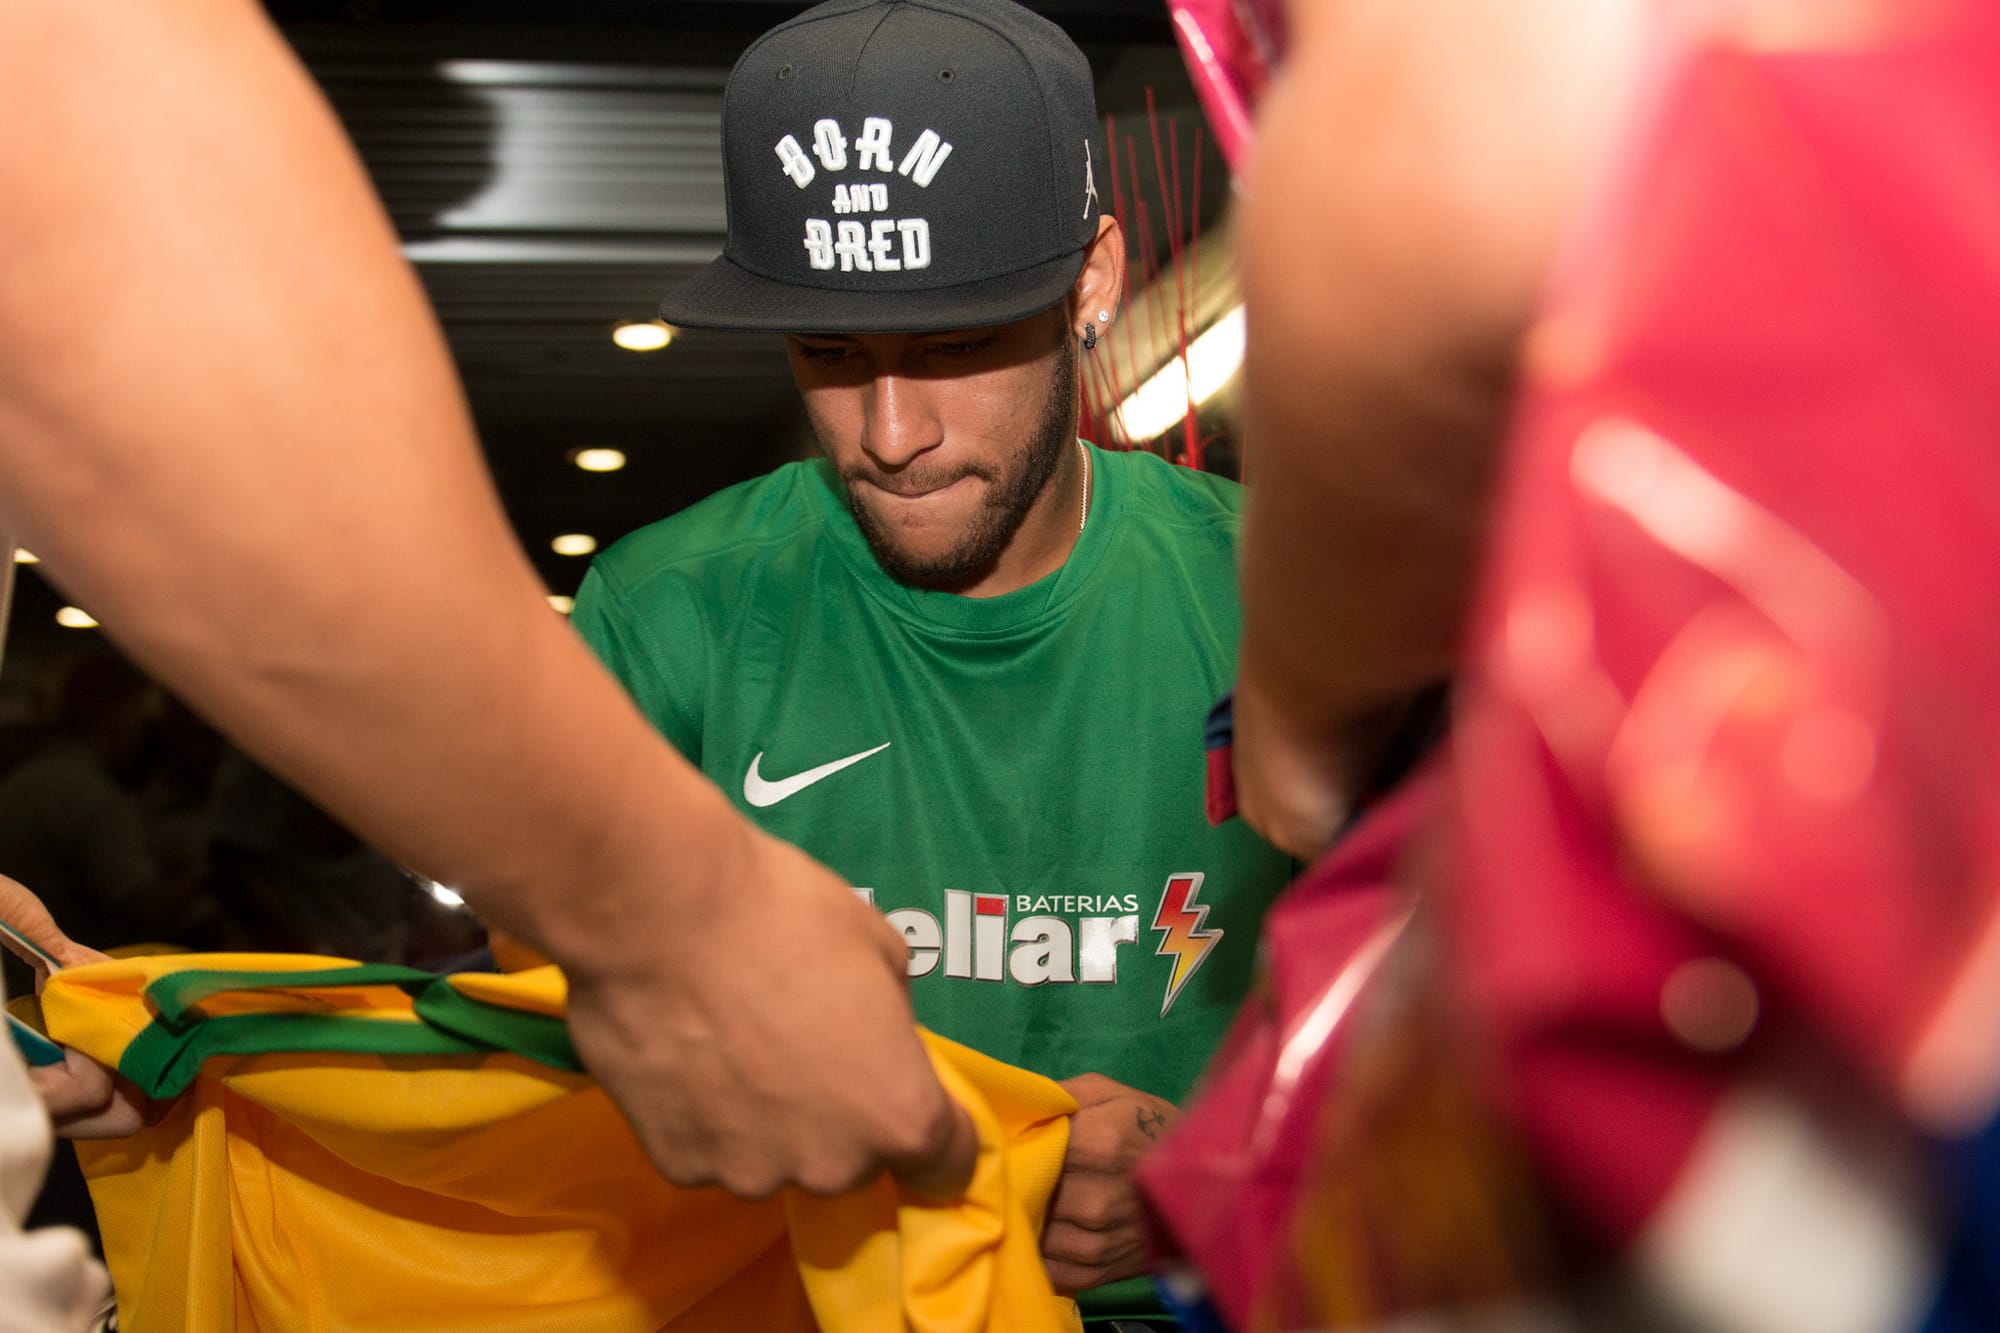 neymar a famous football player is giving autograms for fans photo taken for event video production company barcelona